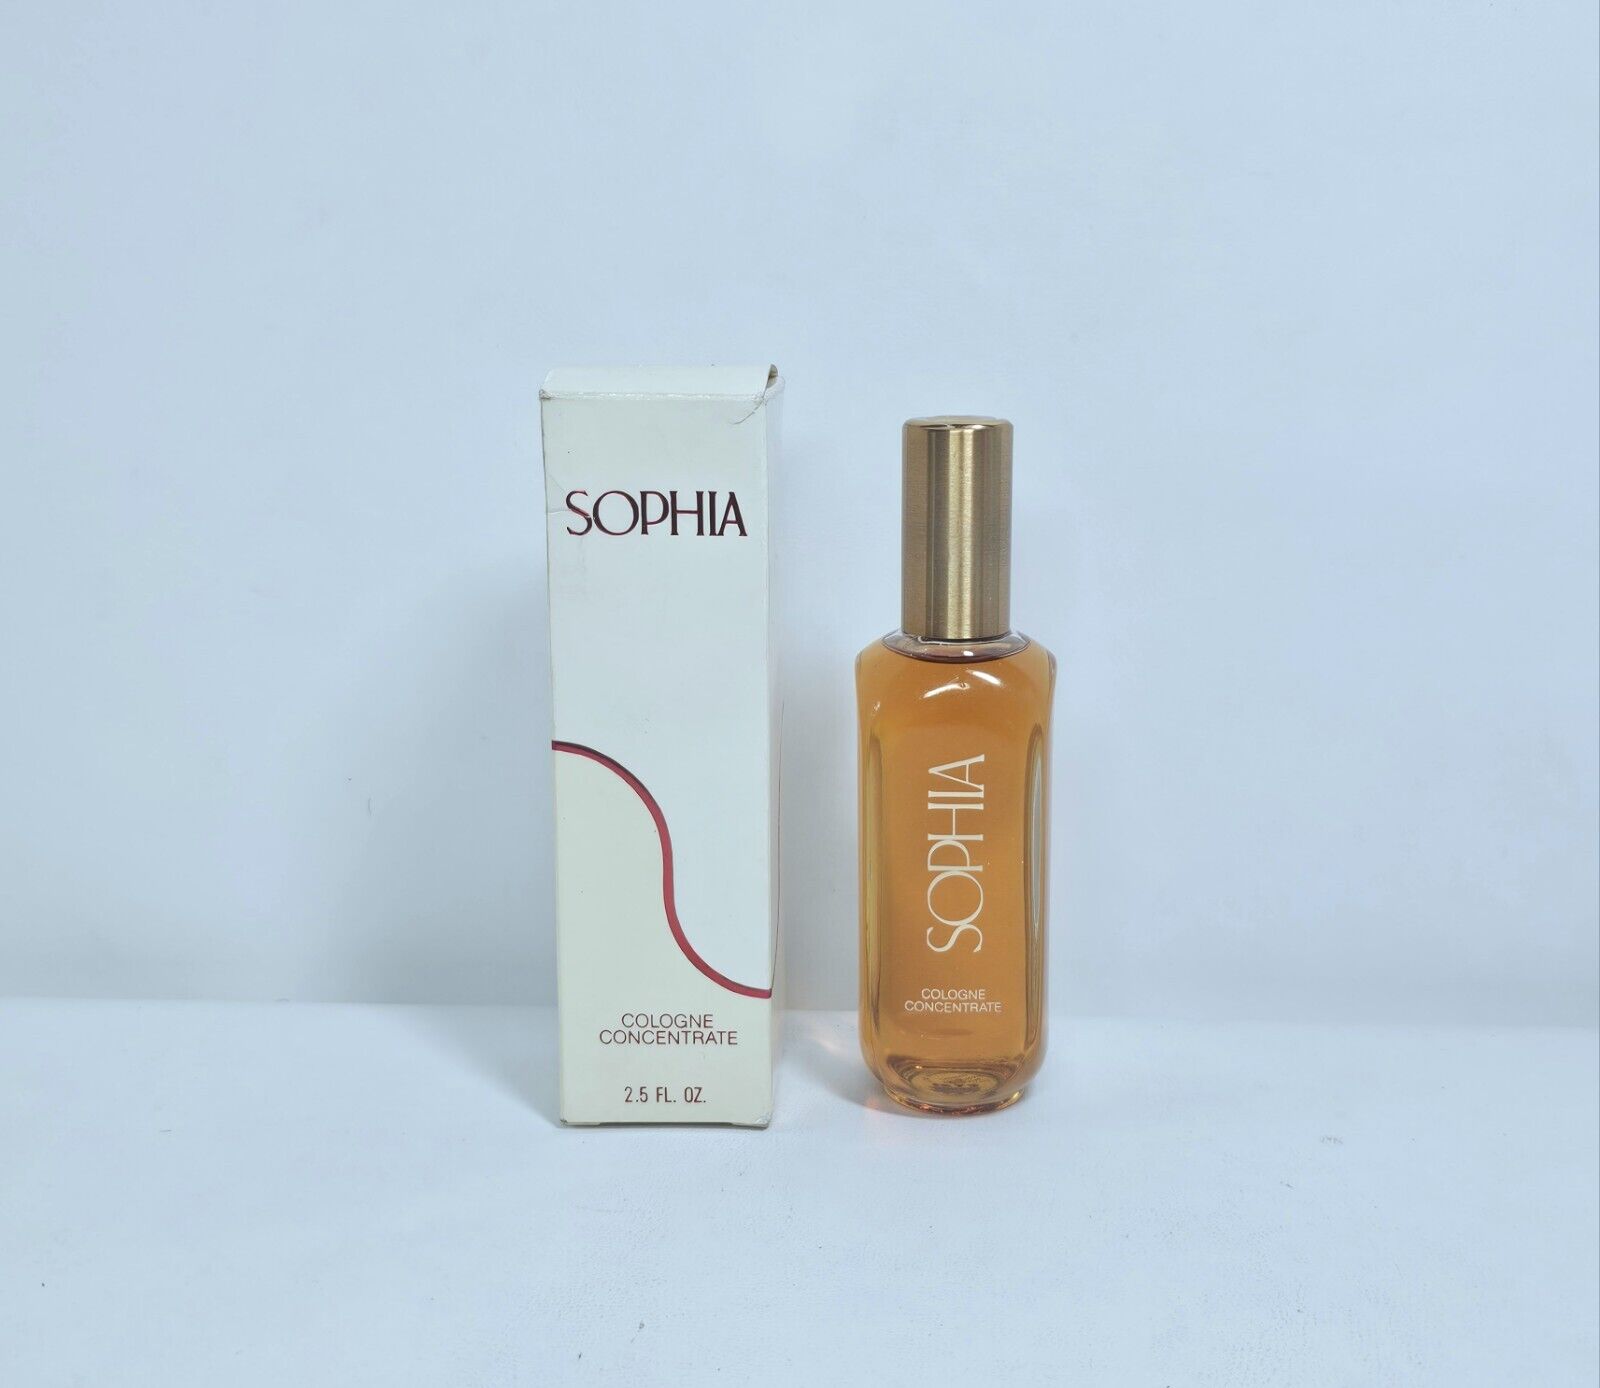 Vintage Sophia Cologne Concentrate By Coty - 2.5 fl oz / 75 ml